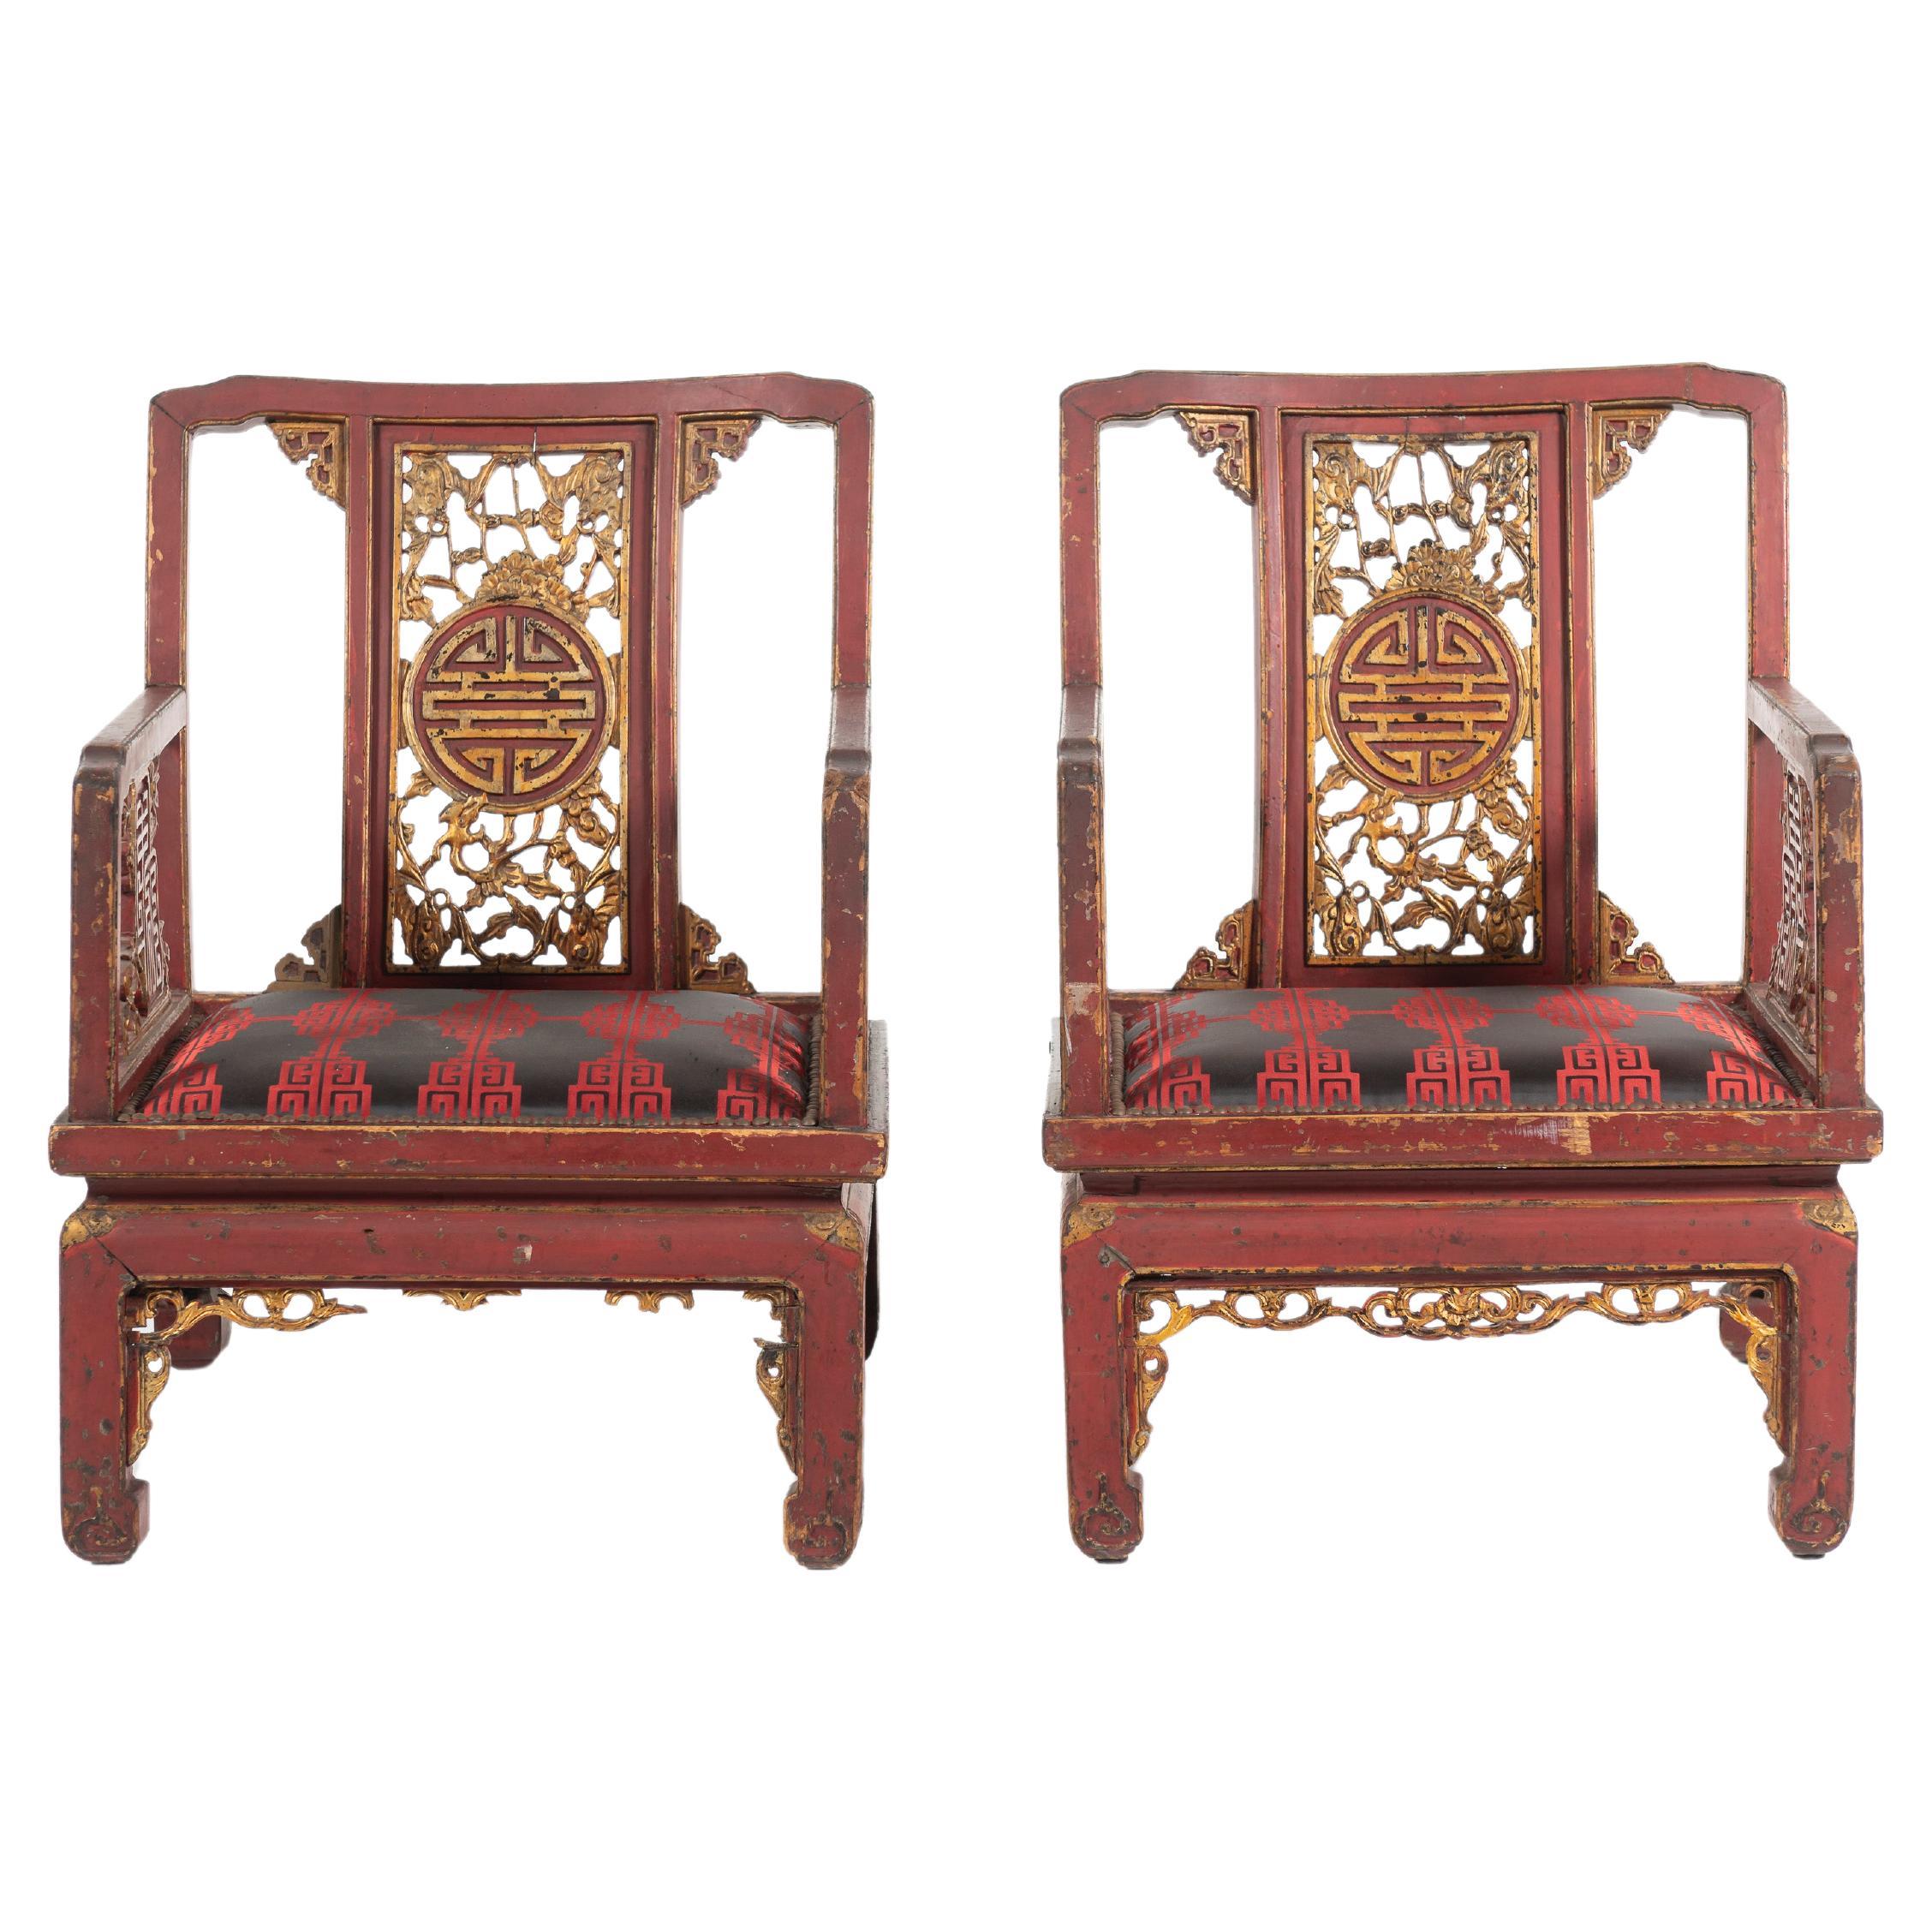 Pair of antique French Chinoiserie Arm Chairs from the late 19th Century. These grand chairs are painted in Chinese red with gold decoratively applied on the traditional fretwork patterns. Fitted with black and red silk chair pads, the chairs have a